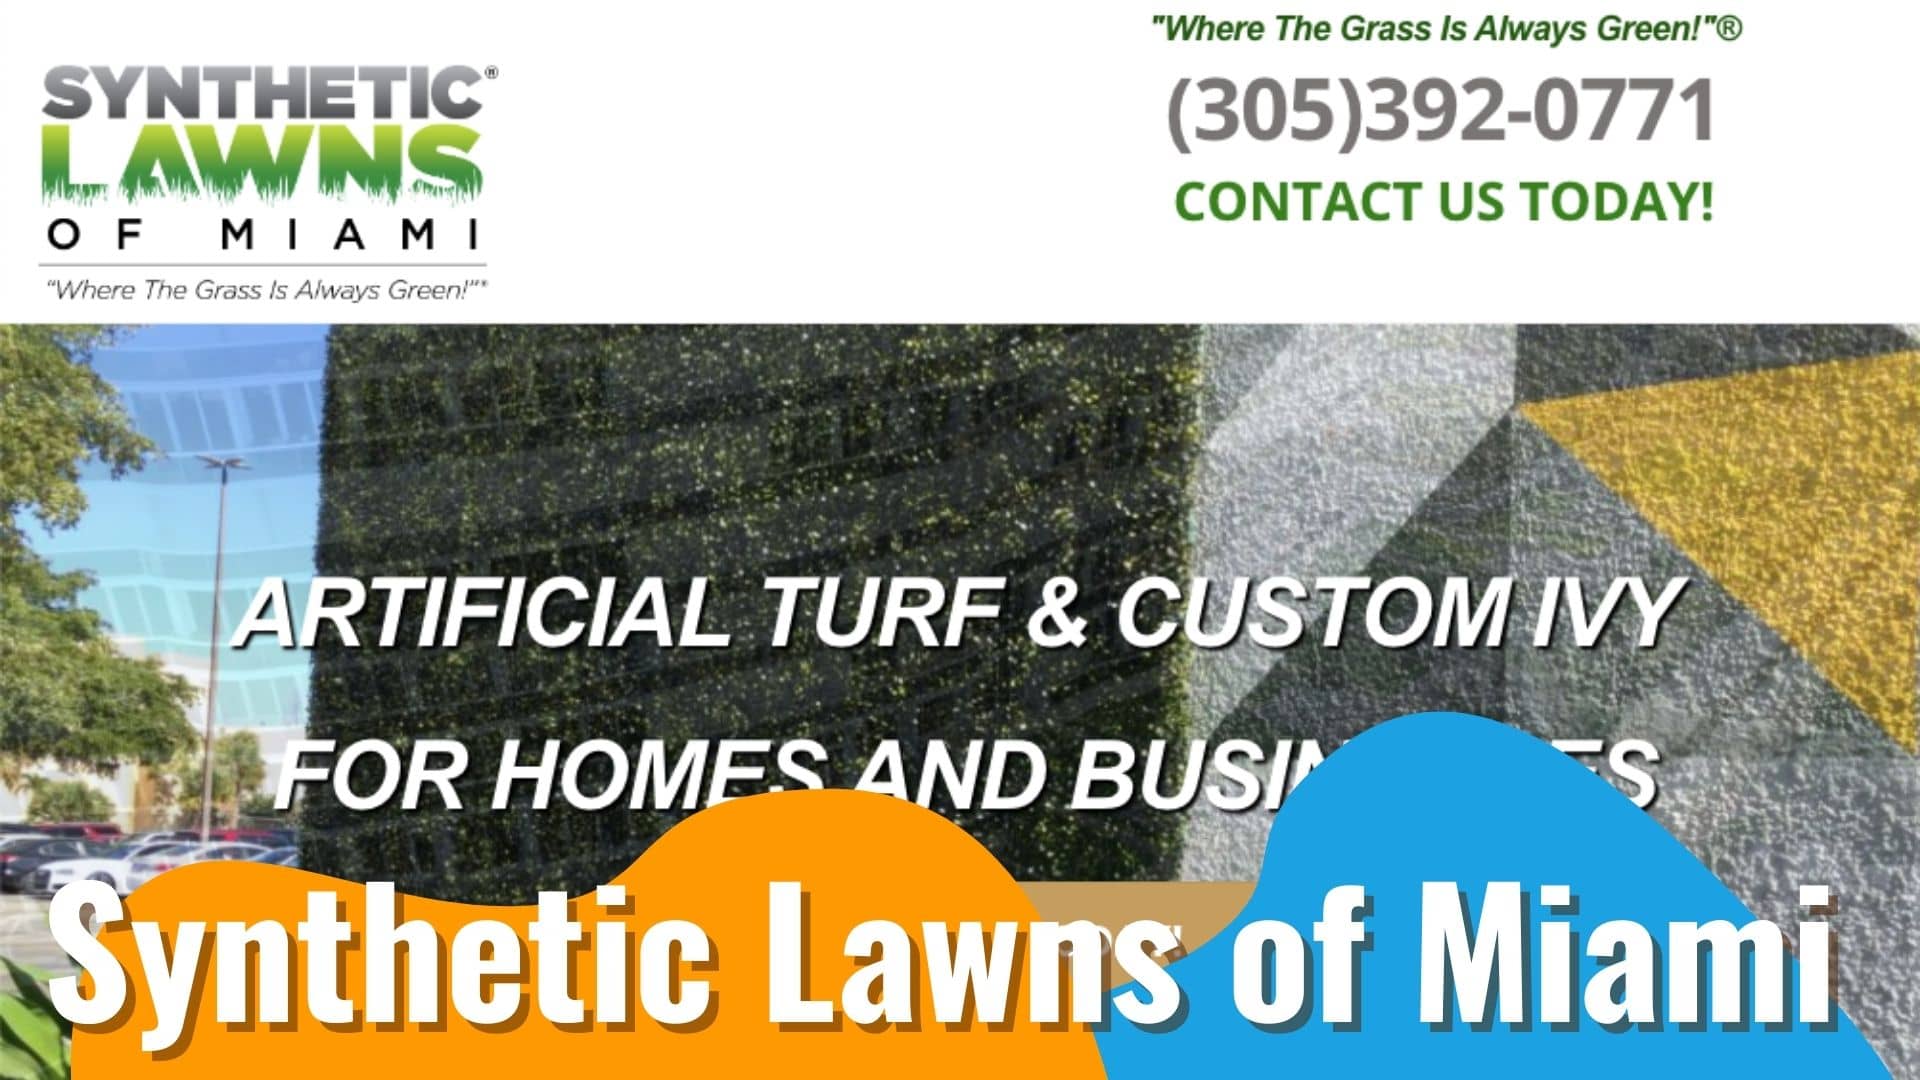 Synthetic Lawns of Miami